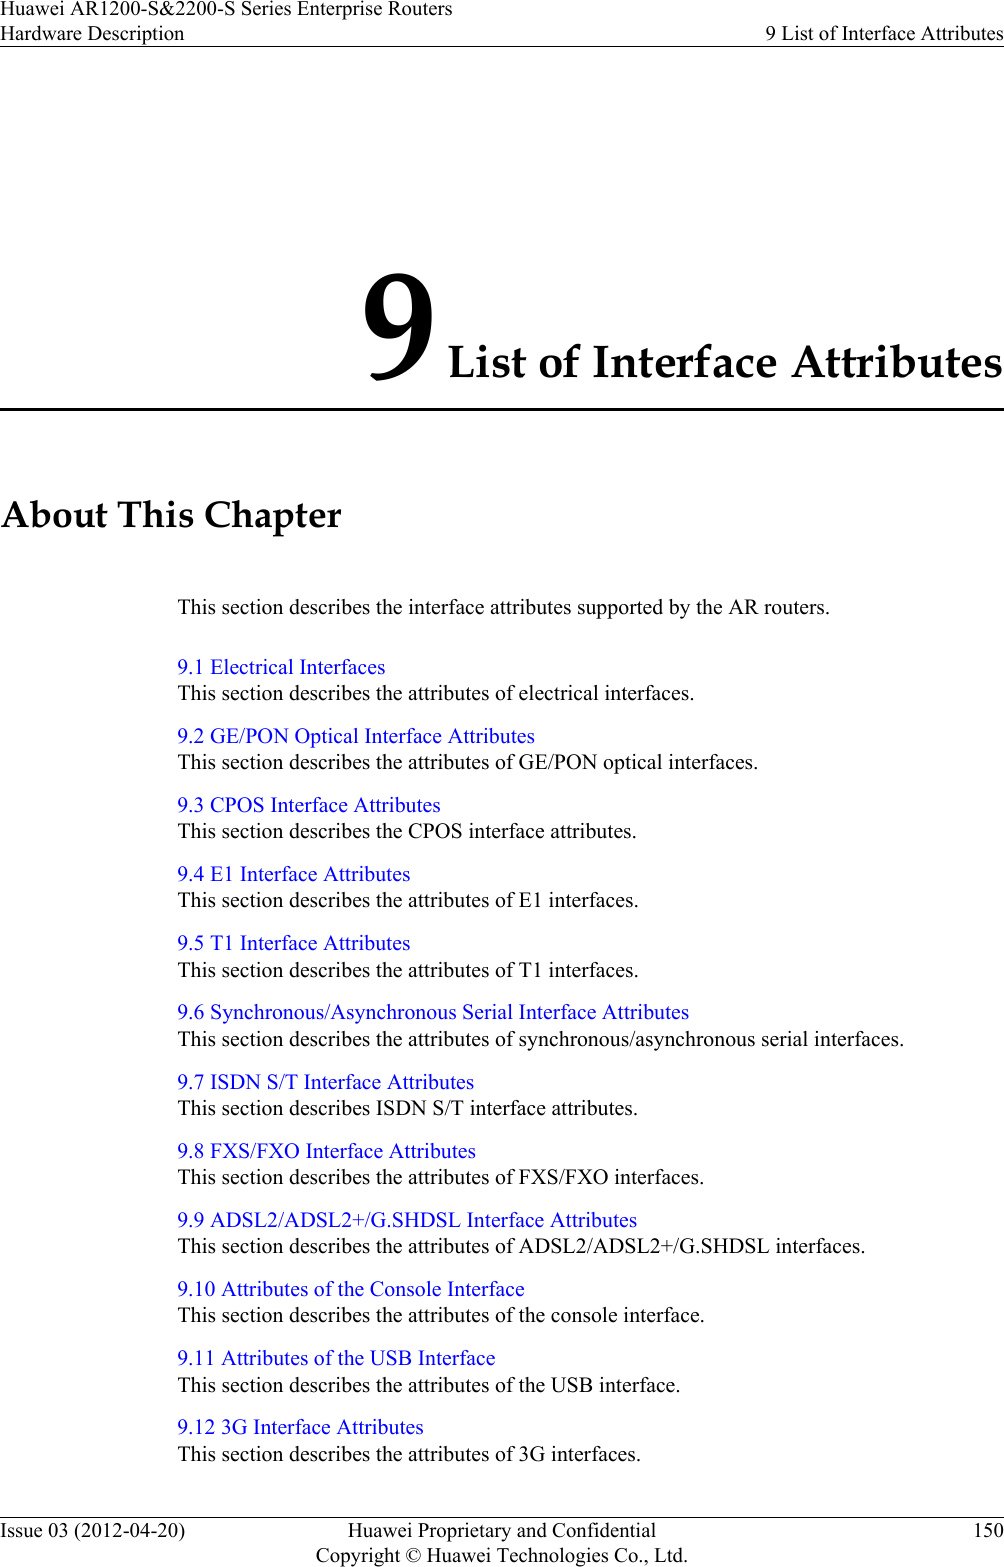 9 List of Interface AttributesAbout This ChapterThis section describes the interface attributes supported by the AR routers.9.1 Electrical InterfacesThis section describes the attributes of electrical interfaces.9.2 GE/PON Optical Interface AttributesThis section describes the attributes of GE/PON optical interfaces.9.3 CPOS Interface AttributesThis section describes the CPOS interface attributes.9.4 E1 Interface AttributesThis section describes the attributes of E1 interfaces.9.5 T1 Interface AttributesThis section describes the attributes of T1 interfaces.9.6 Synchronous/Asynchronous Serial Interface AttributesThis section describes the attributes of synchronous/asynchronous serial interfaces.9.7 ISDN S/T Interface AttributesThis section describes ISDN S/T interface attributes.9.8 FXS/FXO Interface AttributesThis section describes the attributes of FXS/FXO interfaces.9.9 ADSL2/ADSL2+/G.SHDSL Interface AttributesThis section describes the attributes of ADSL2/ADSL2+/G.SHDSL interfaces.9.10 Attributes of the Console InterfaceThis section describes the attributes of the console interface.9.11 Attributes of the USB InterfaceThis section describes the attributes of the USB interface.9.12 3G Interface AttributesThis section describes the attributes of 3G interfaces.Huawei AR1200-S&amp;2200-S Series Enterprise RoutersHardware Description 9 List of Interface AttributesIssue 03 (2012-04-20) Huawei Proprietary and ConfidentialCopyright © Huawei Technologies Co., Ltd.150